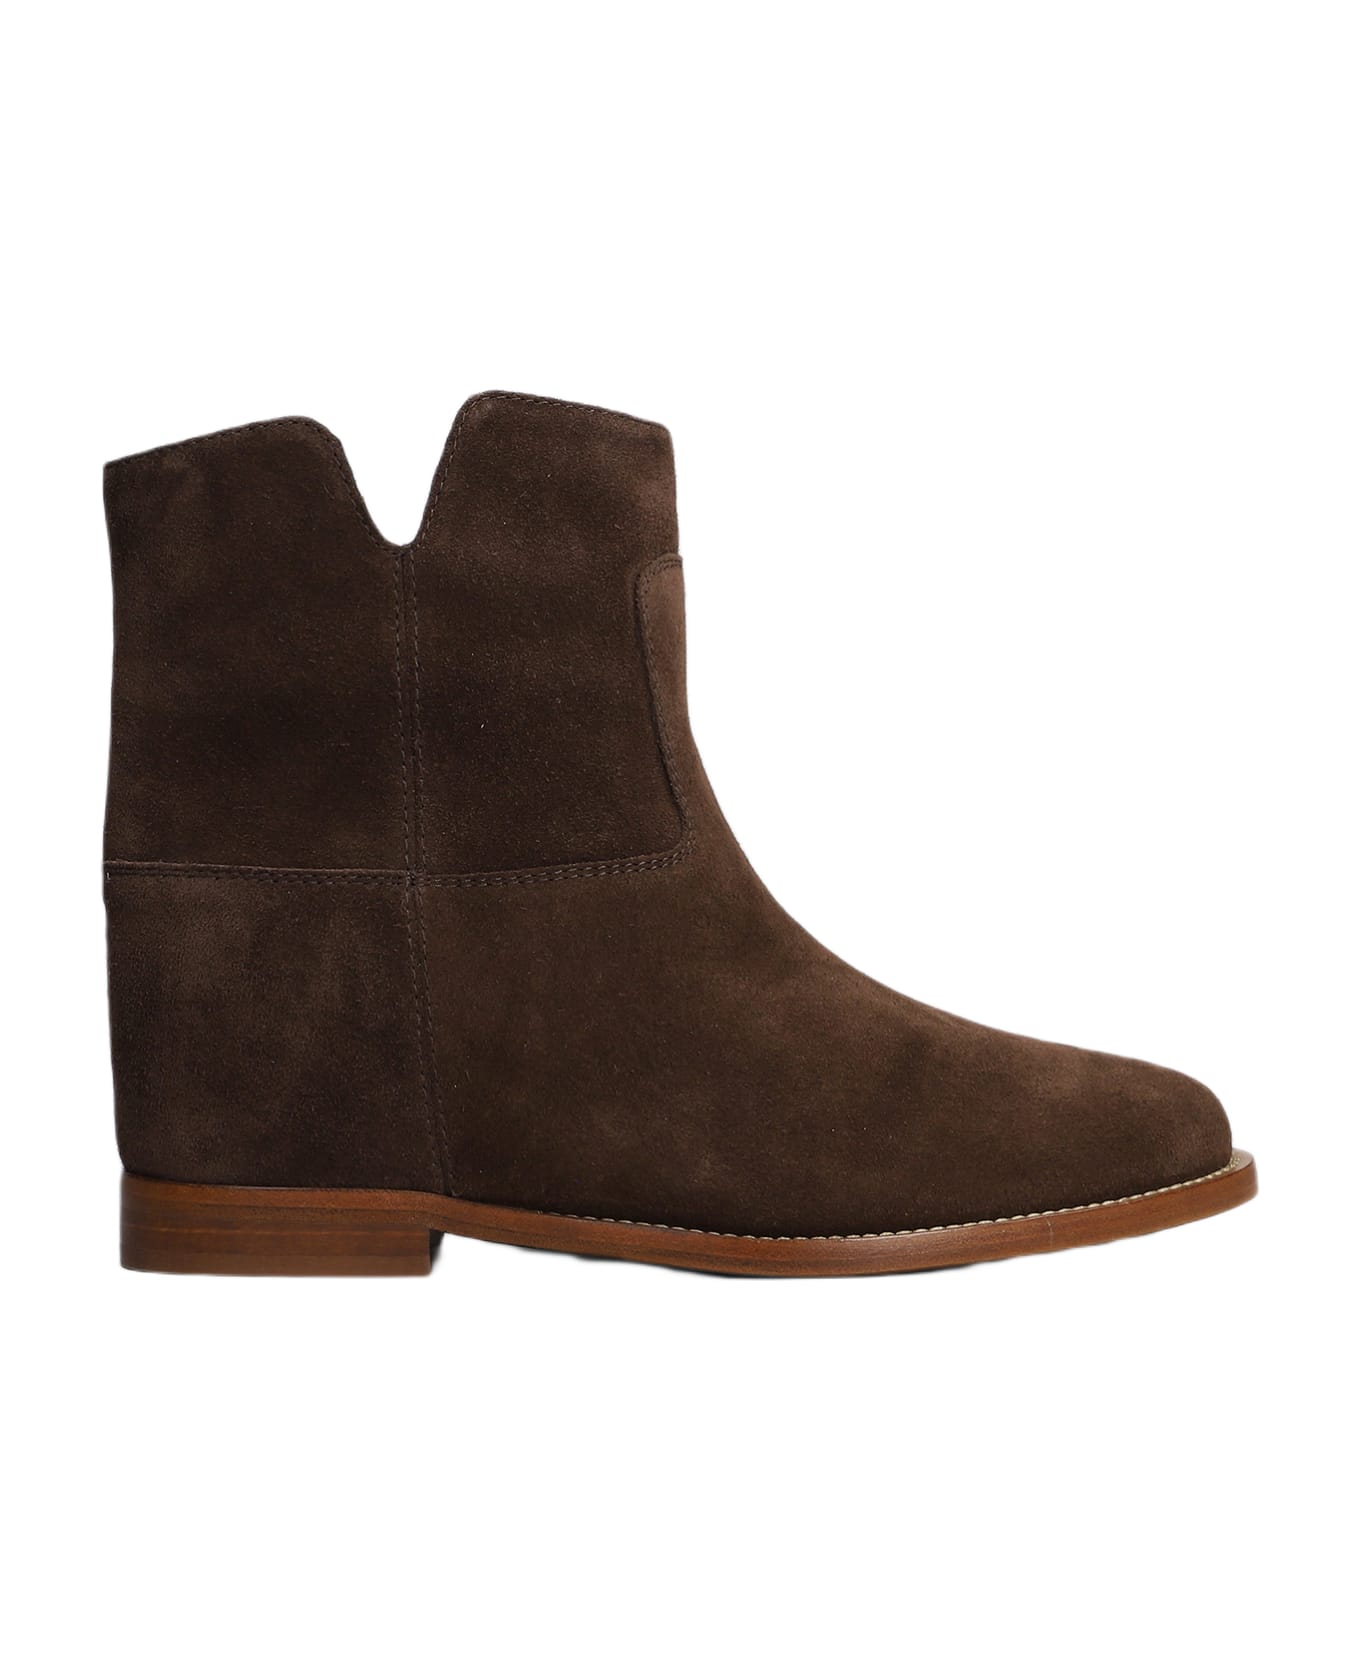 Via Roma 15 Ankle Boots Inside Wedge In Brown Suede - brown ブーツ